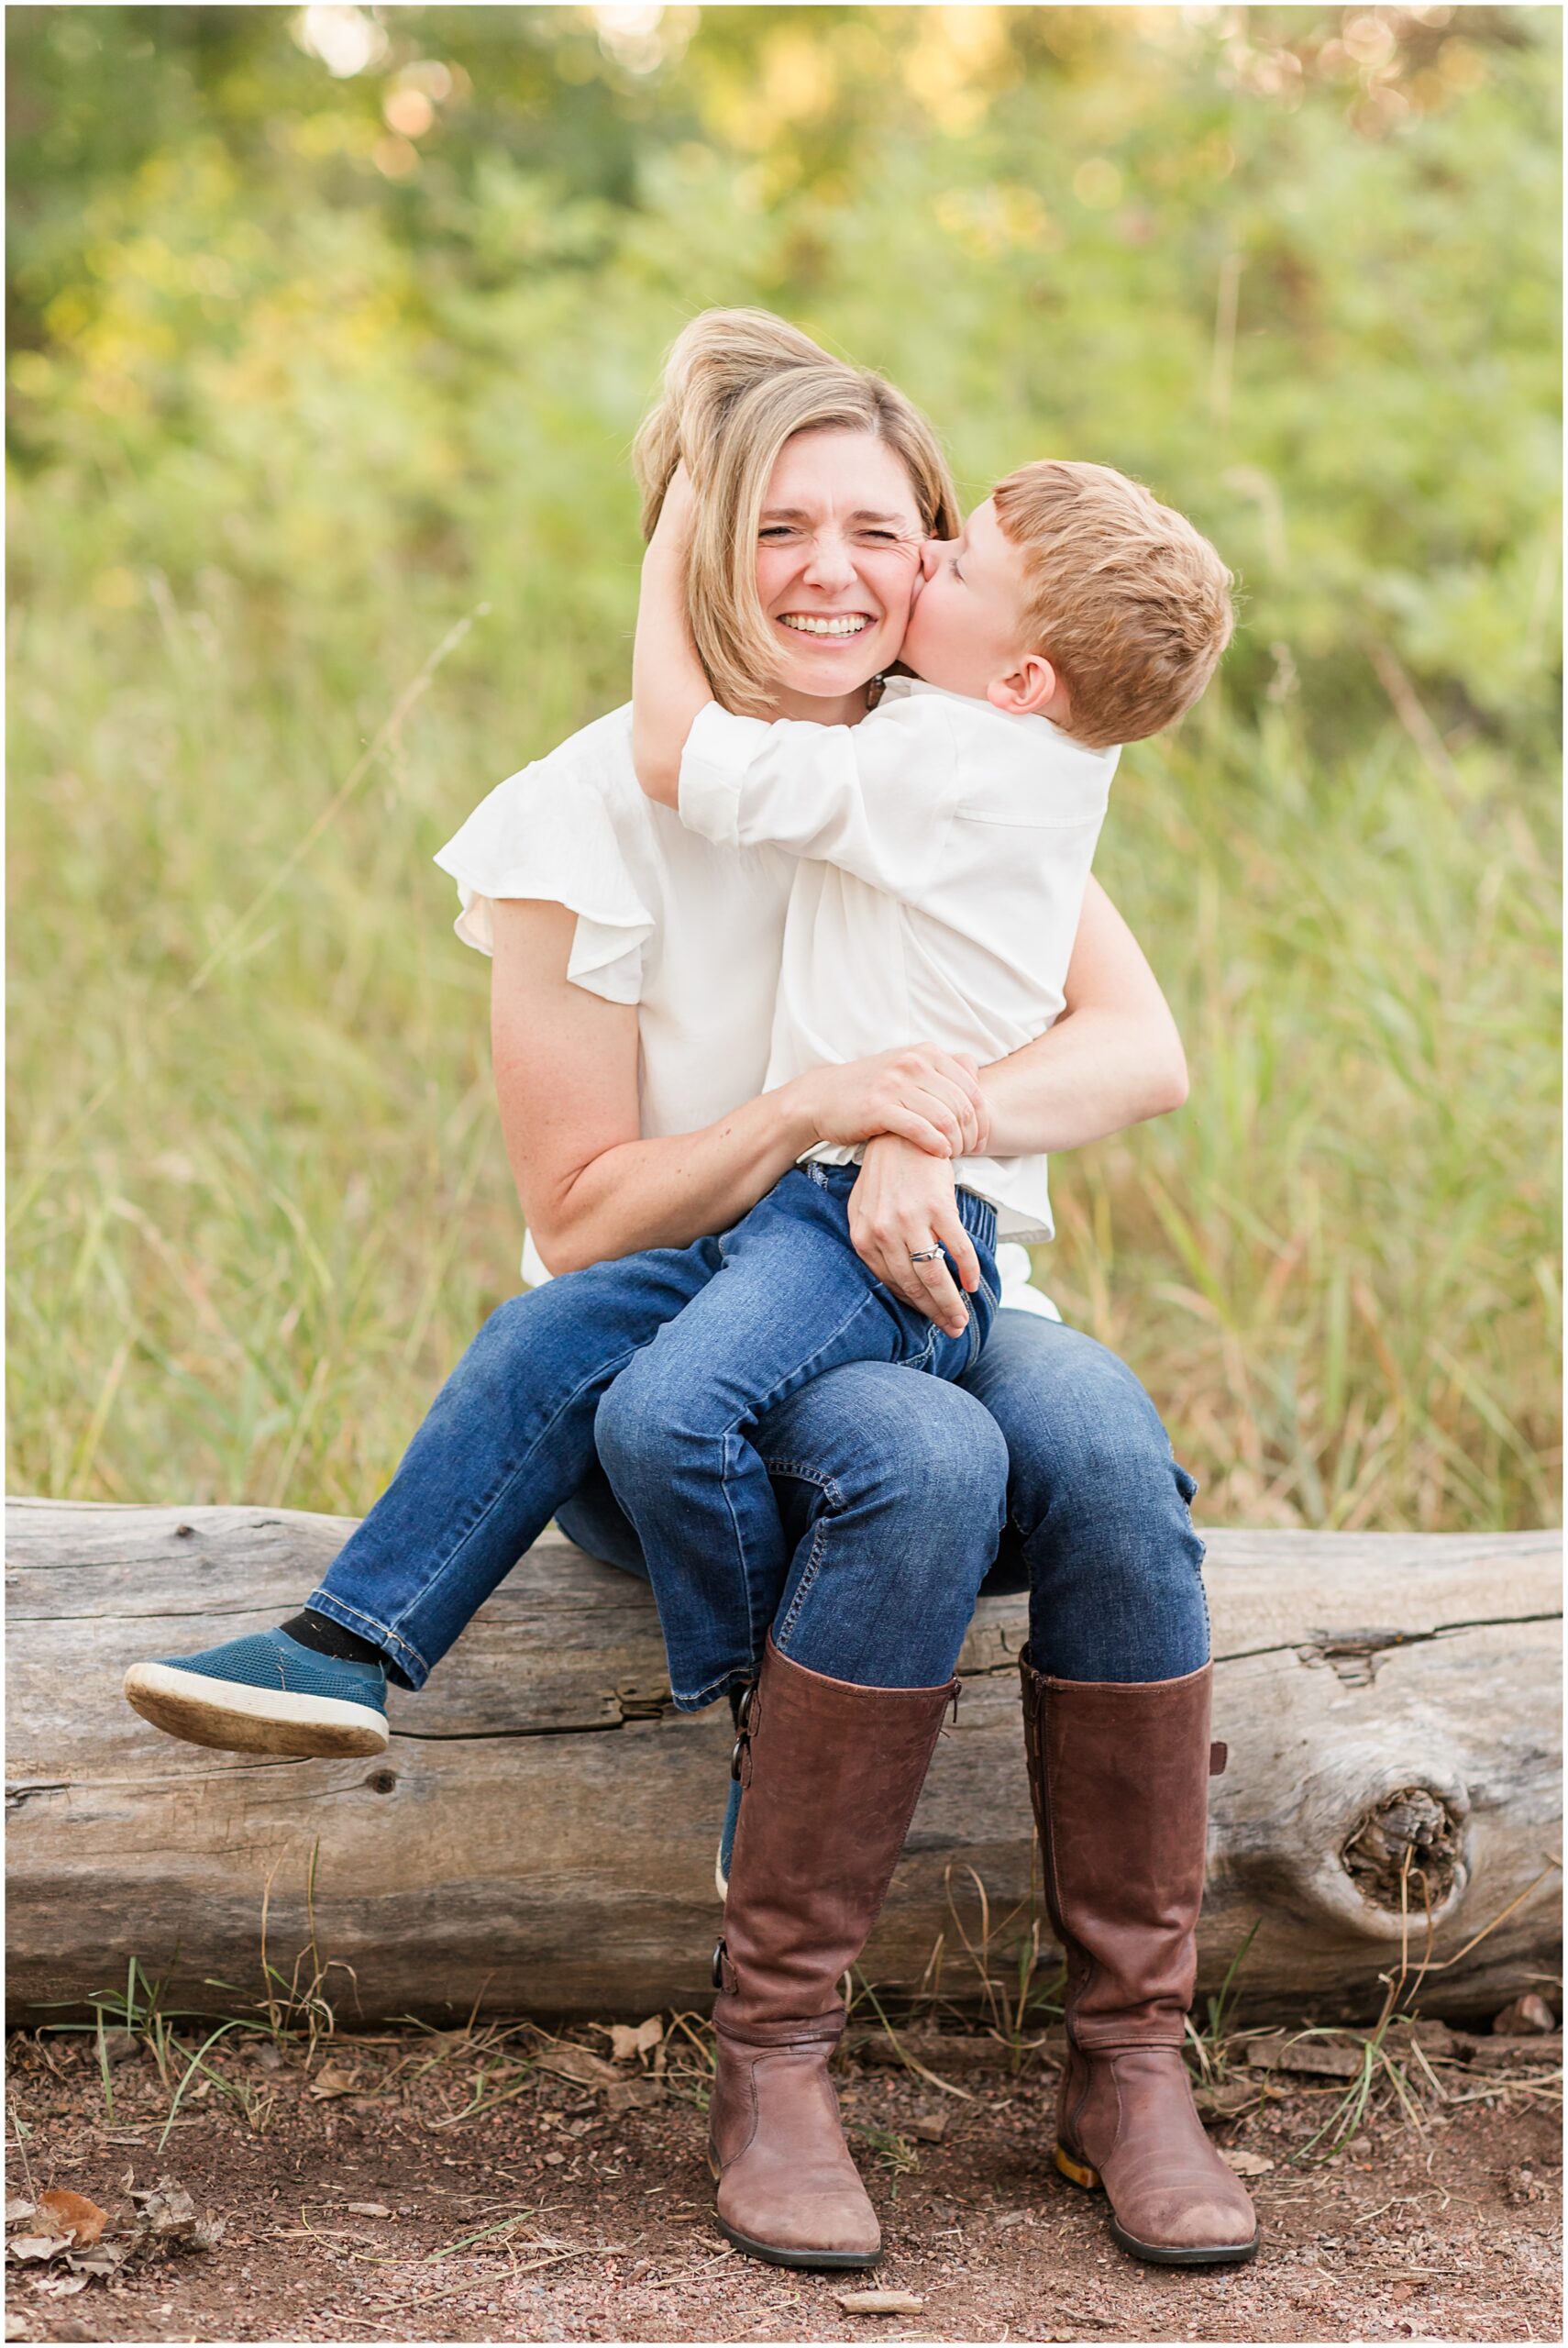 Boy kisses mother's cheek in a joyful moment, captured in a mini family session by Theresa Pelser Photography